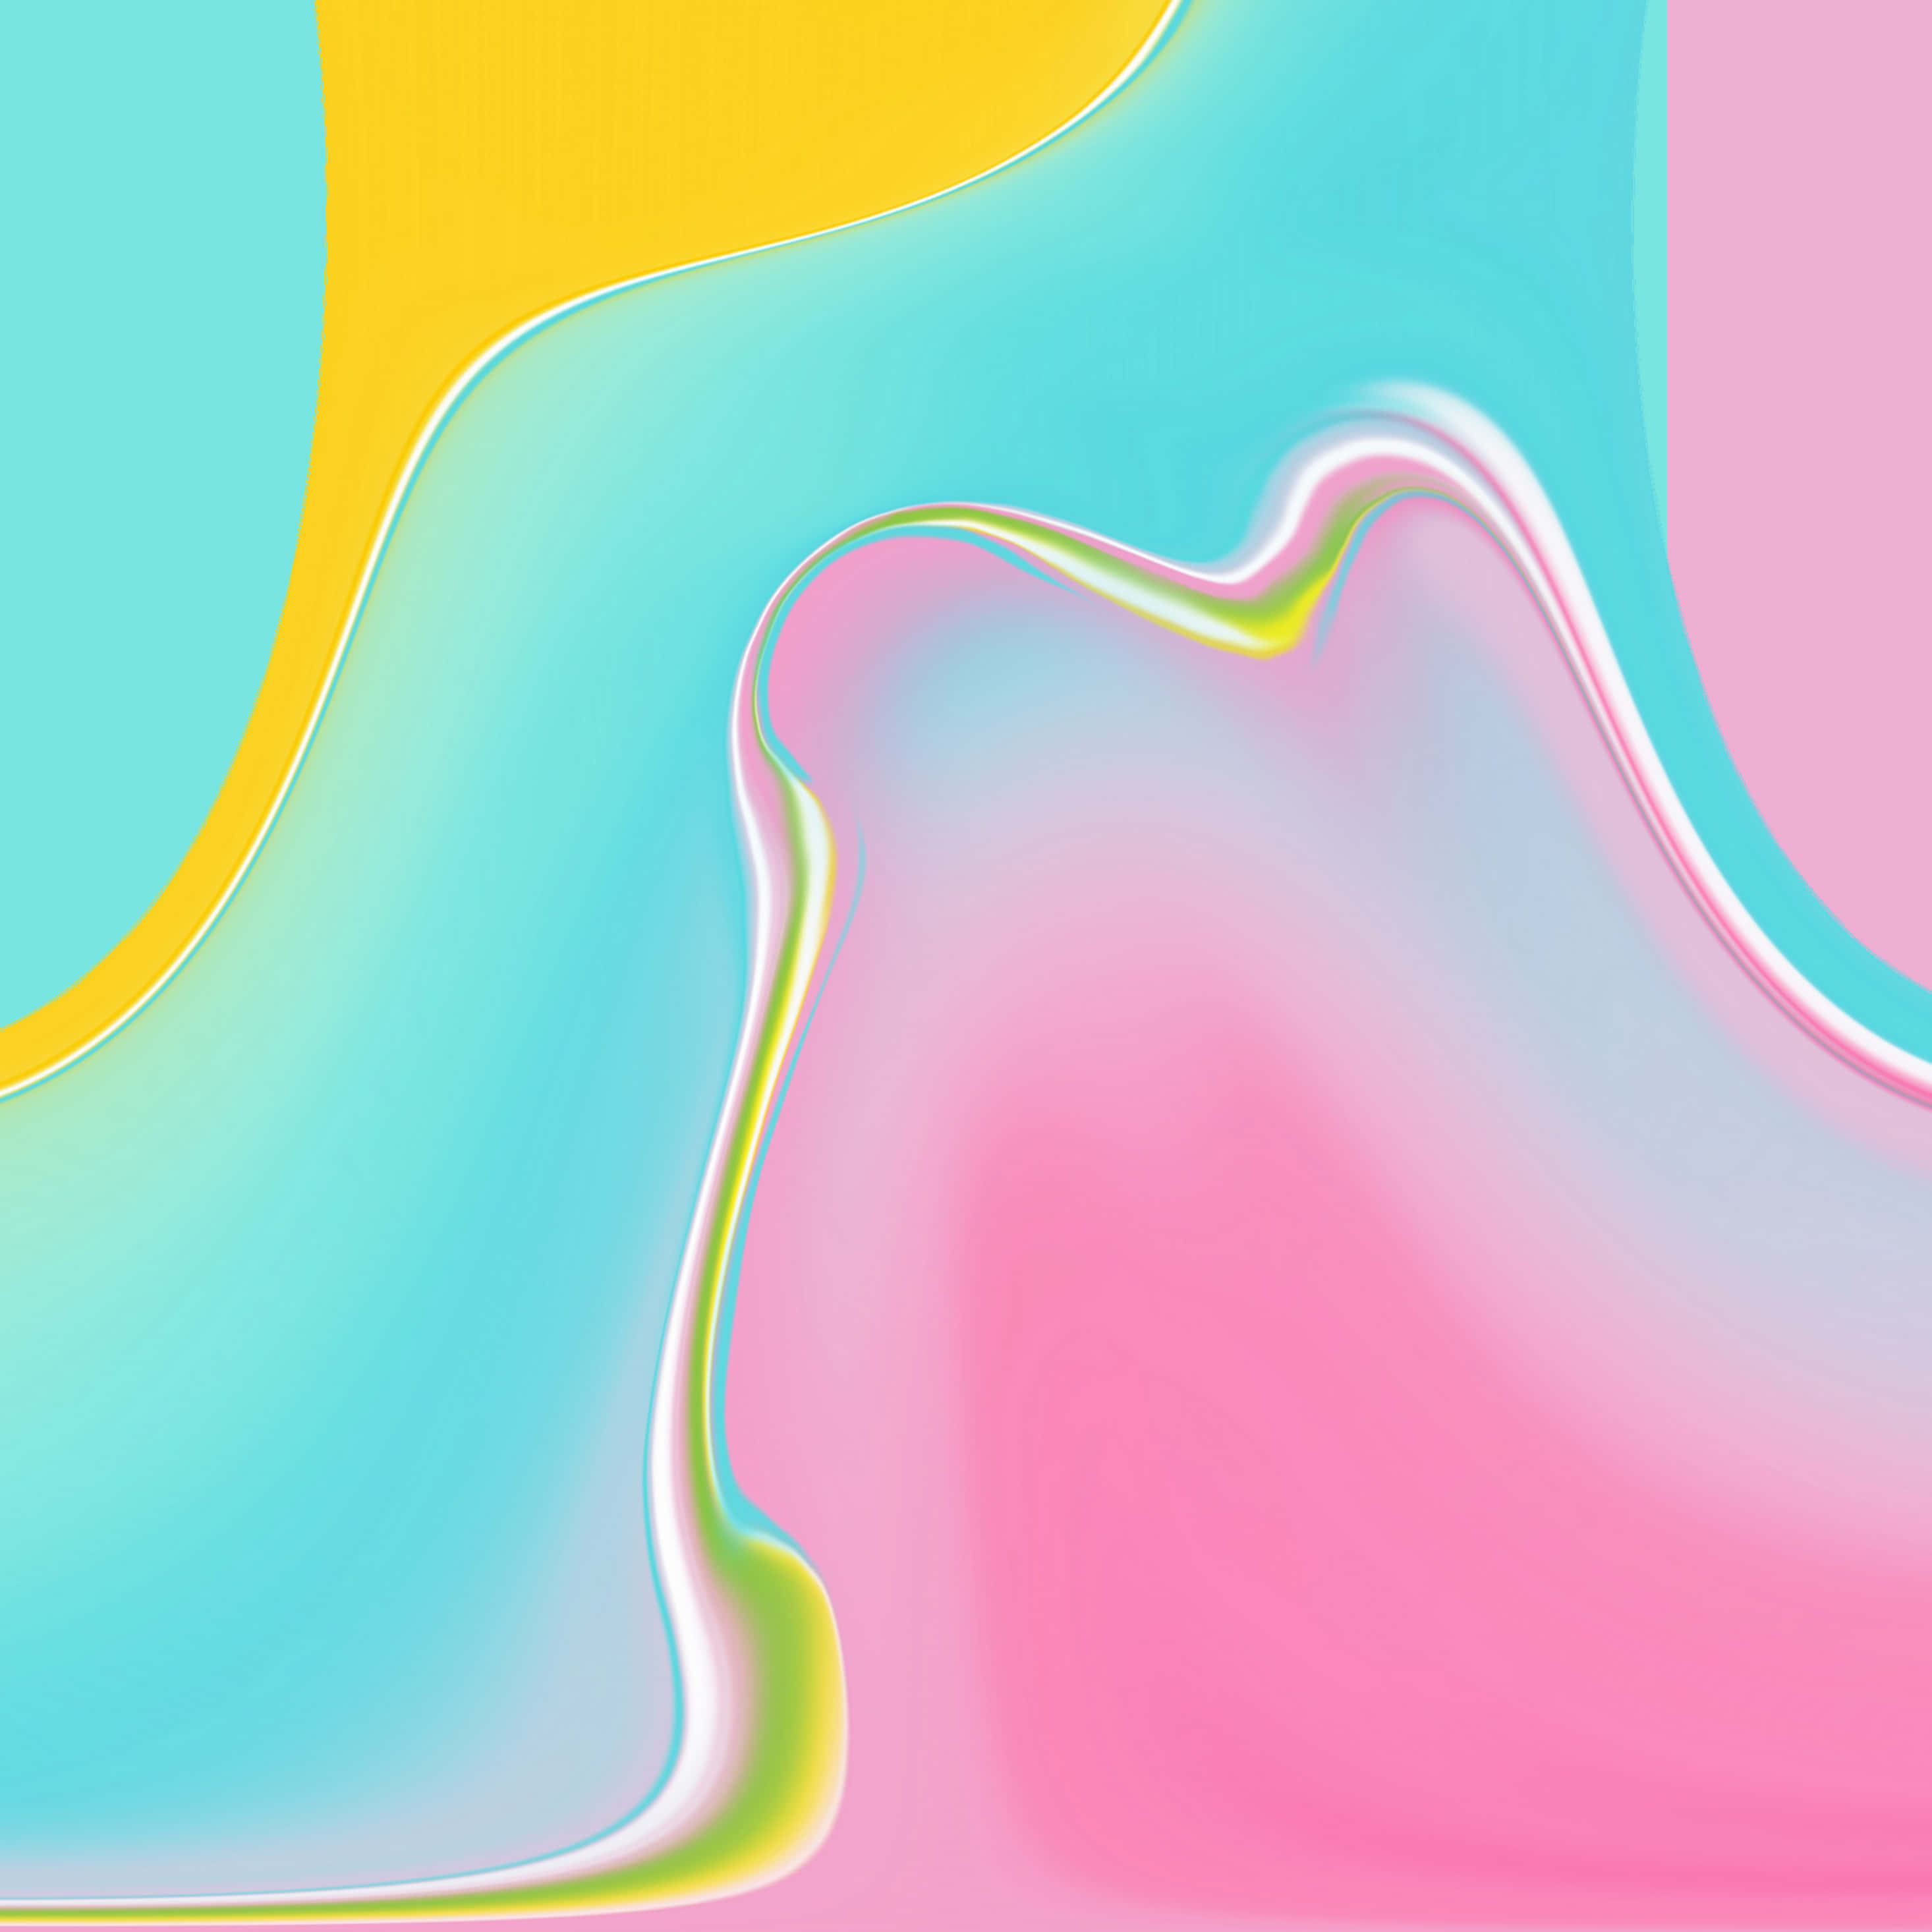 A Colorful Abstract Background With A Pink, Yellow, And Blue Color Wallpaper